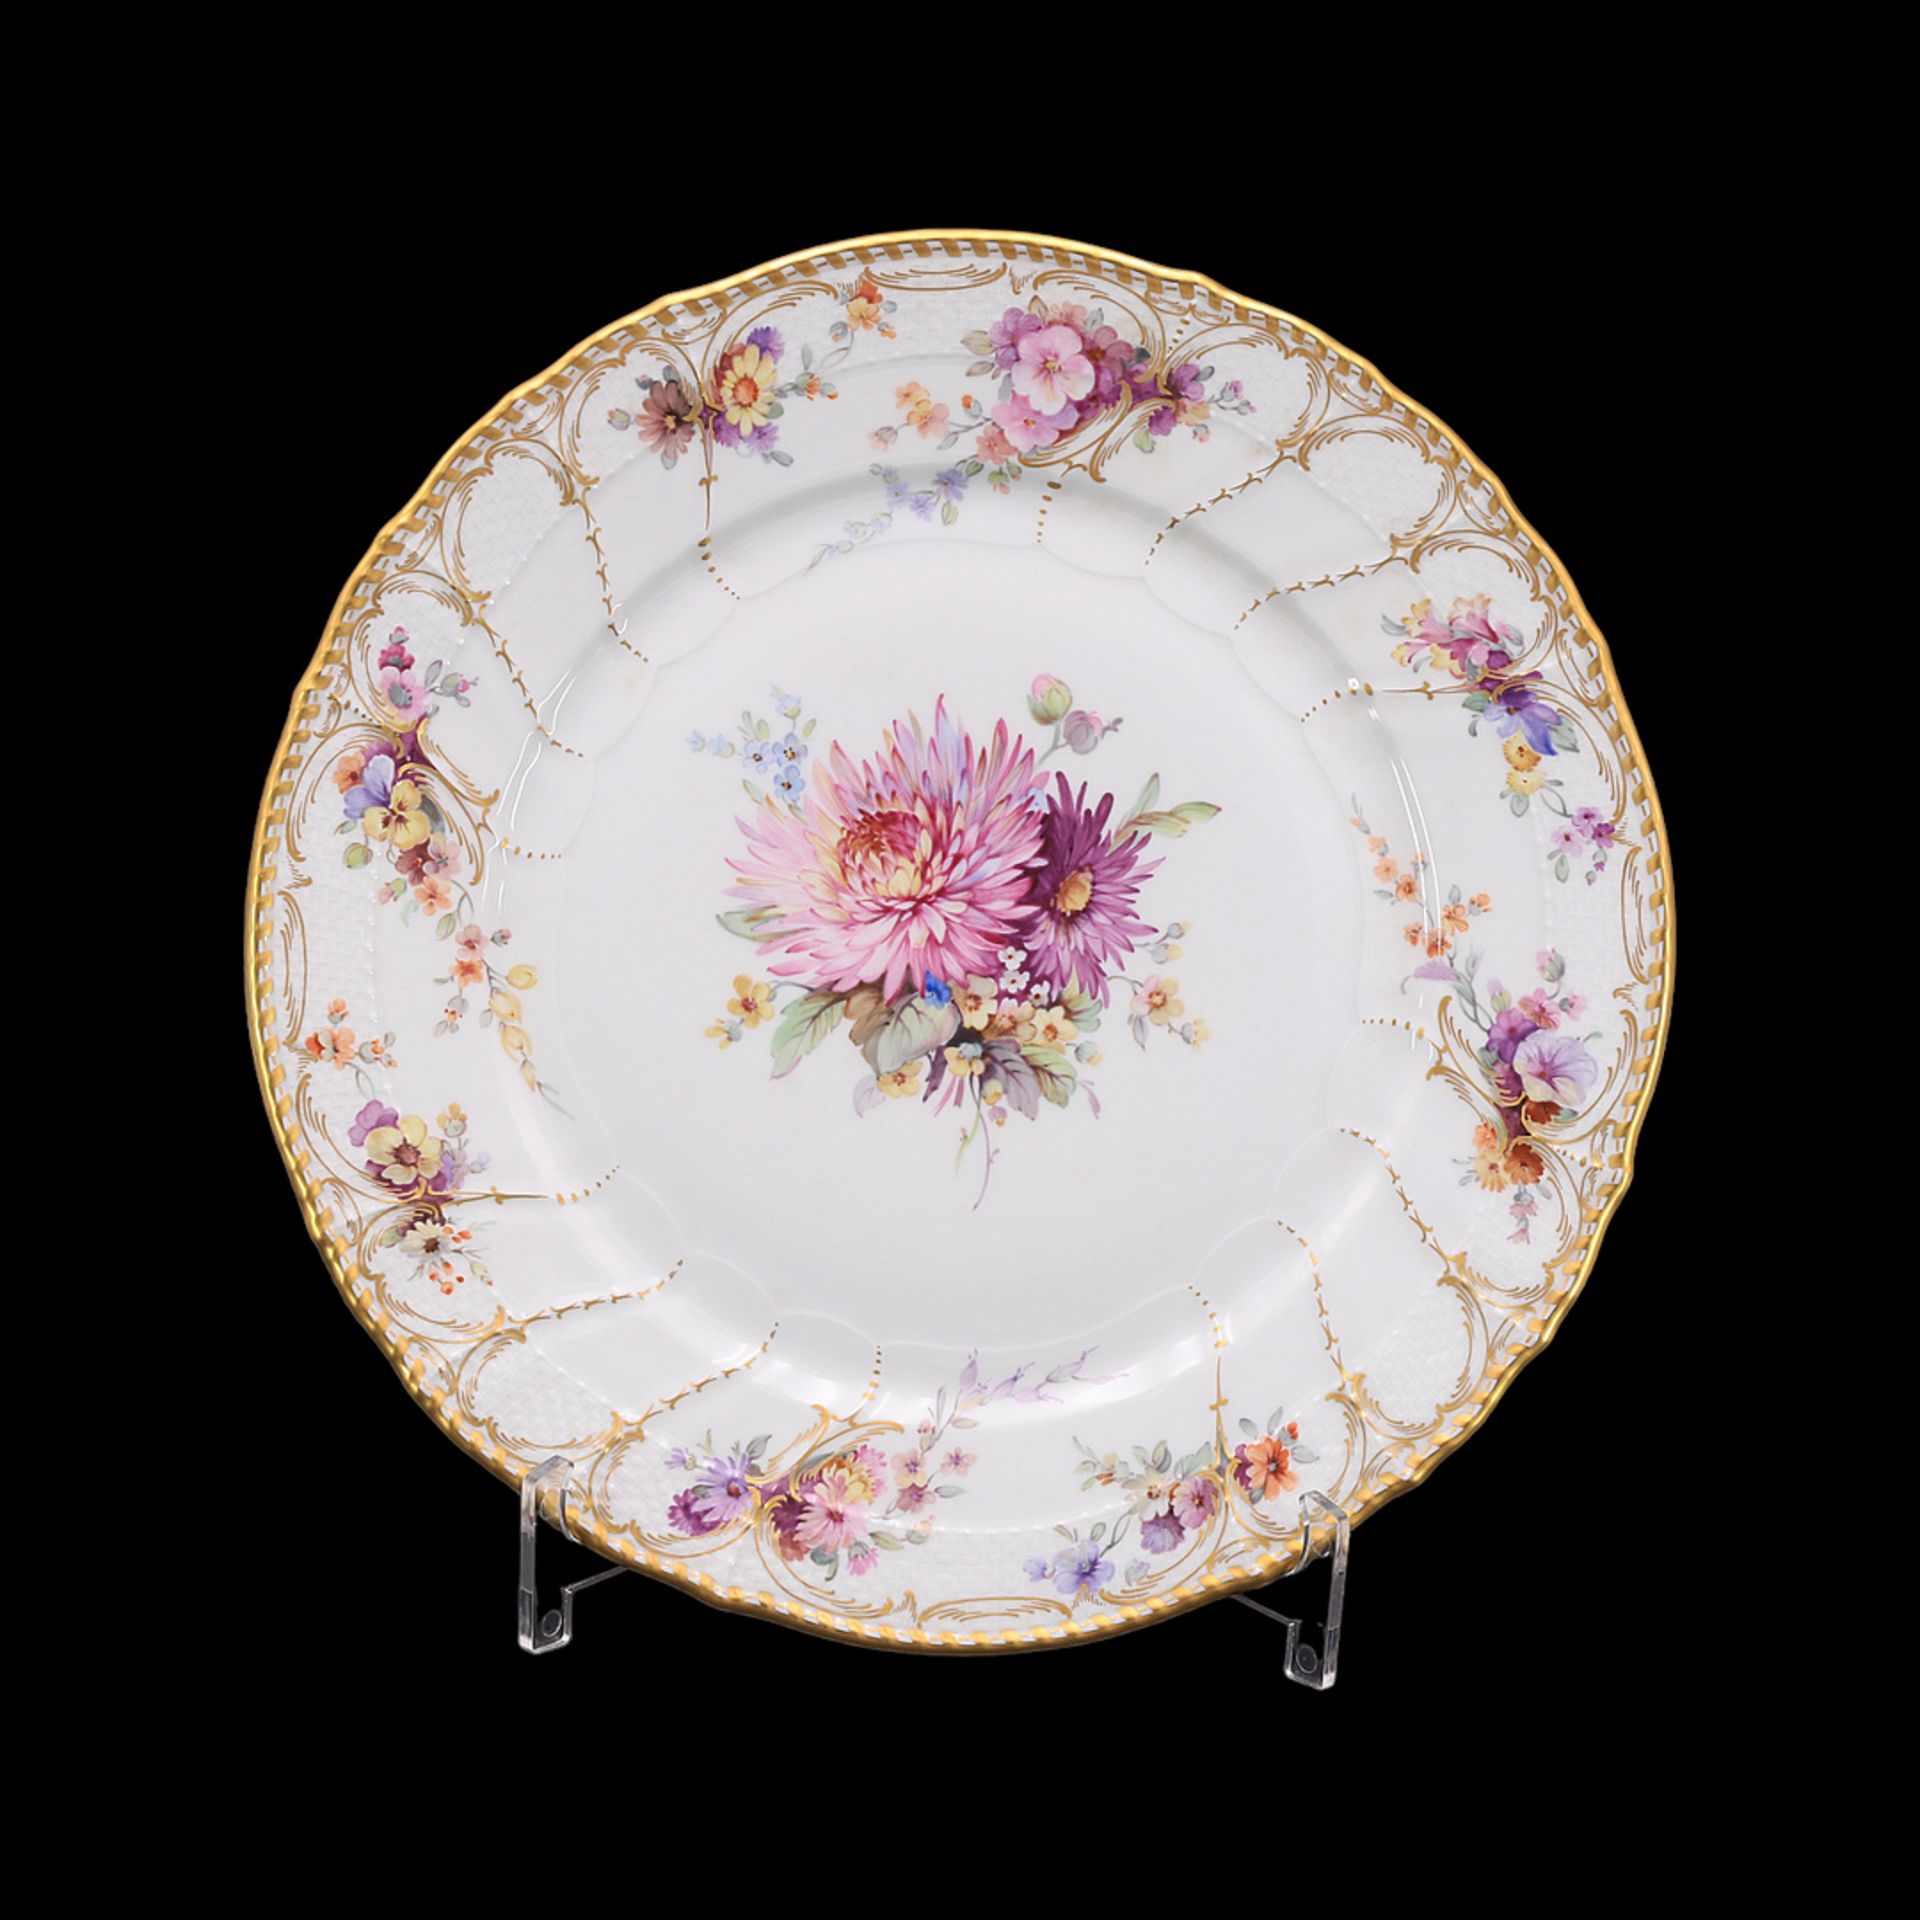 KPM Berlin anniversary plate with flower painting, 1988